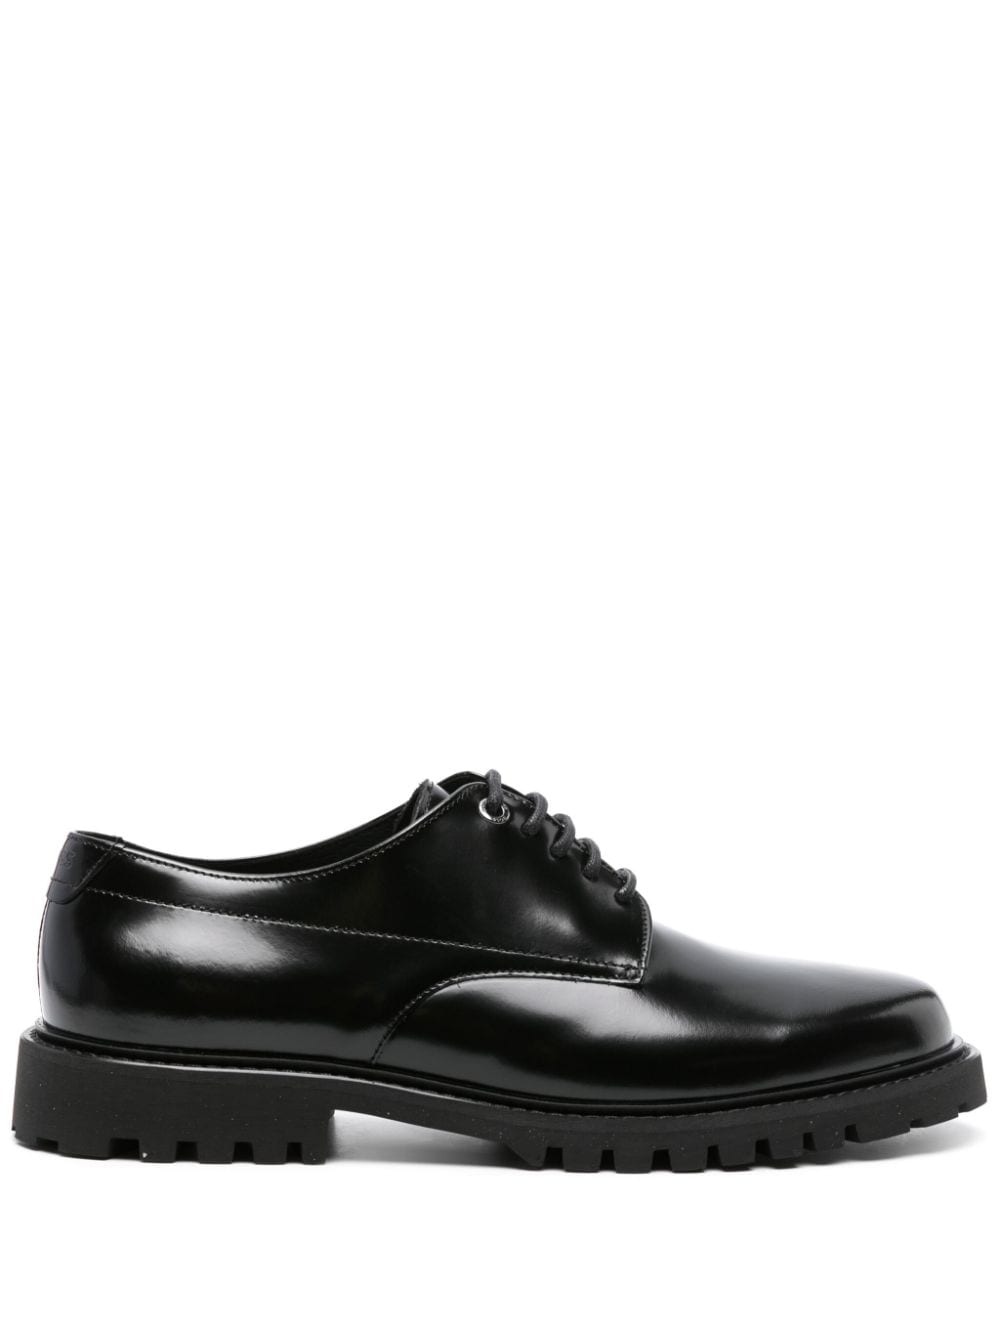 Hugo Boss Ridged Leather Derby Shoes In Black